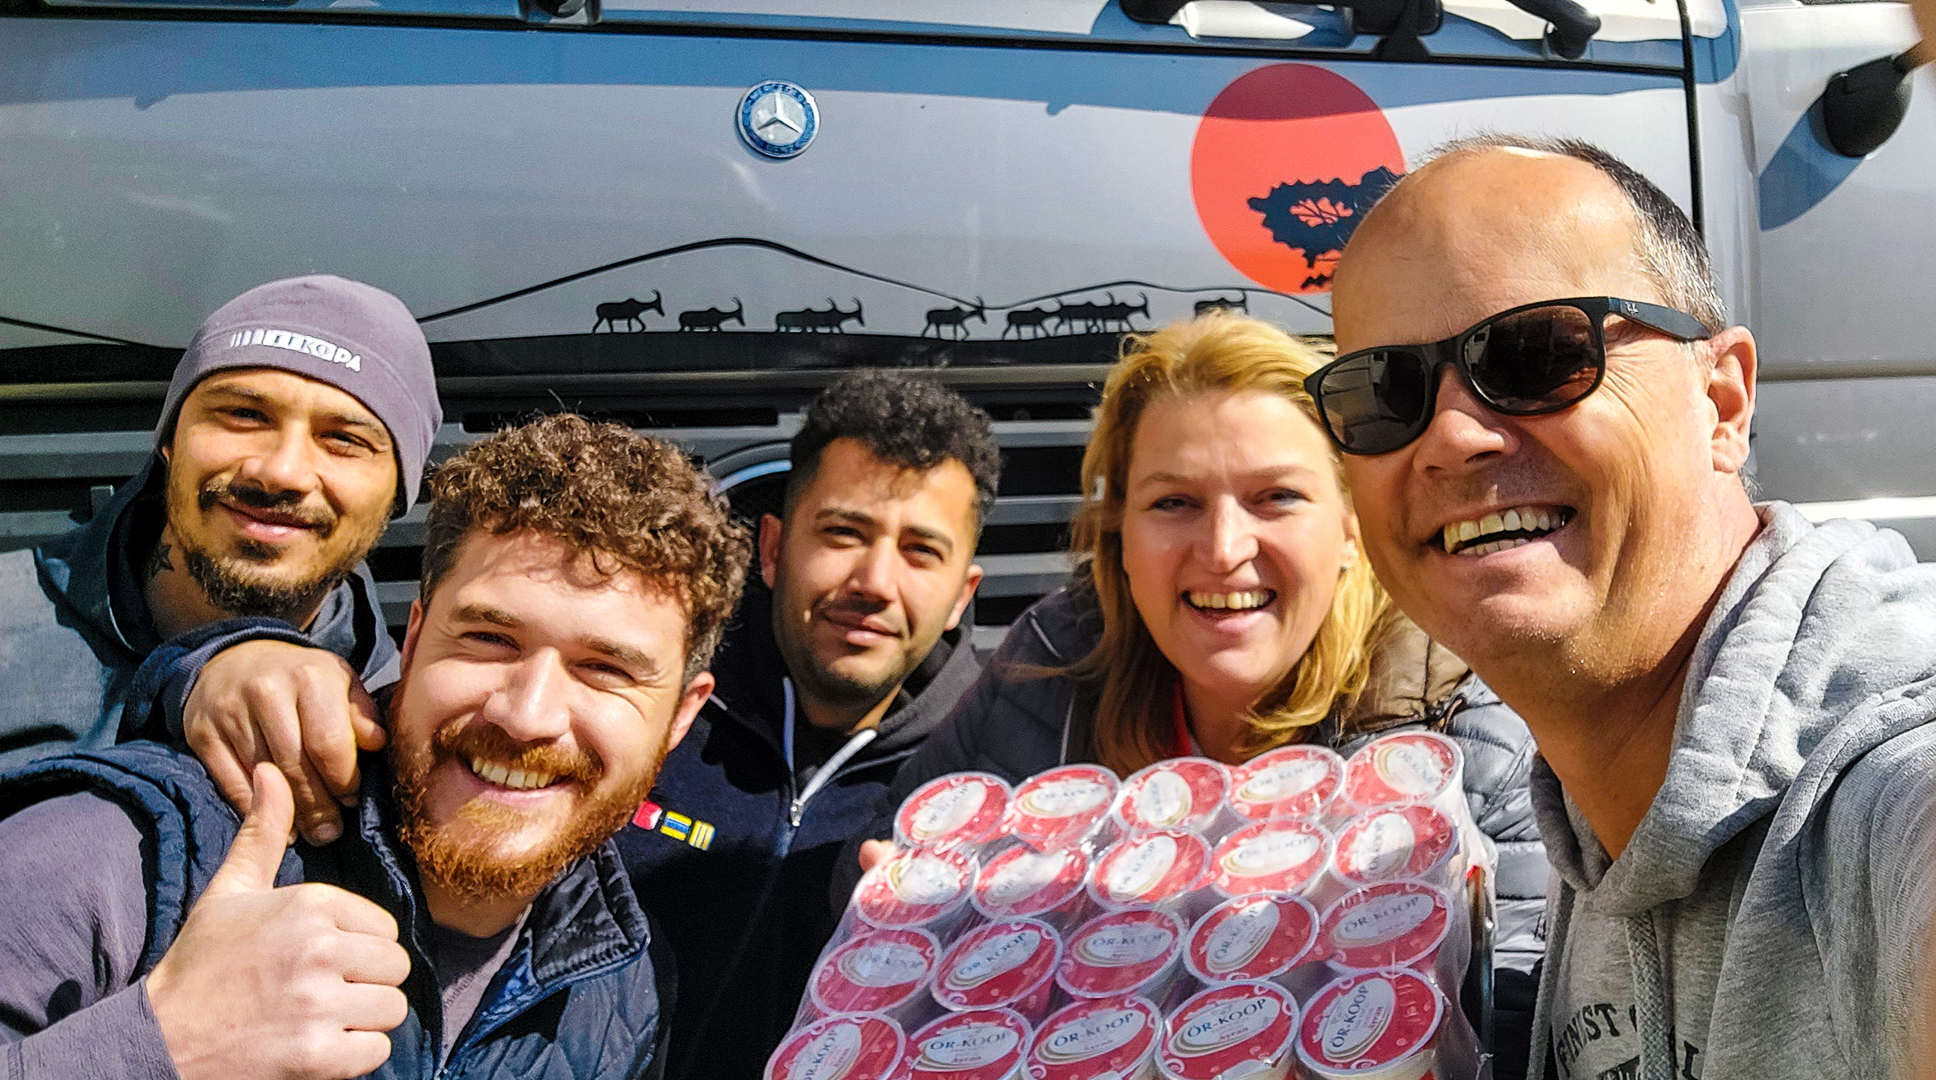 <span  class="uc_style_uc_tiles_grid_image_elementor_uc_items_attribute_title" style="color:#FFFFFF;">So friendly: we got a full package of 'Ayran' as a present because we parked at a Ayran factory, ...whereever we go in Turkey we experience great hospitality!</span>